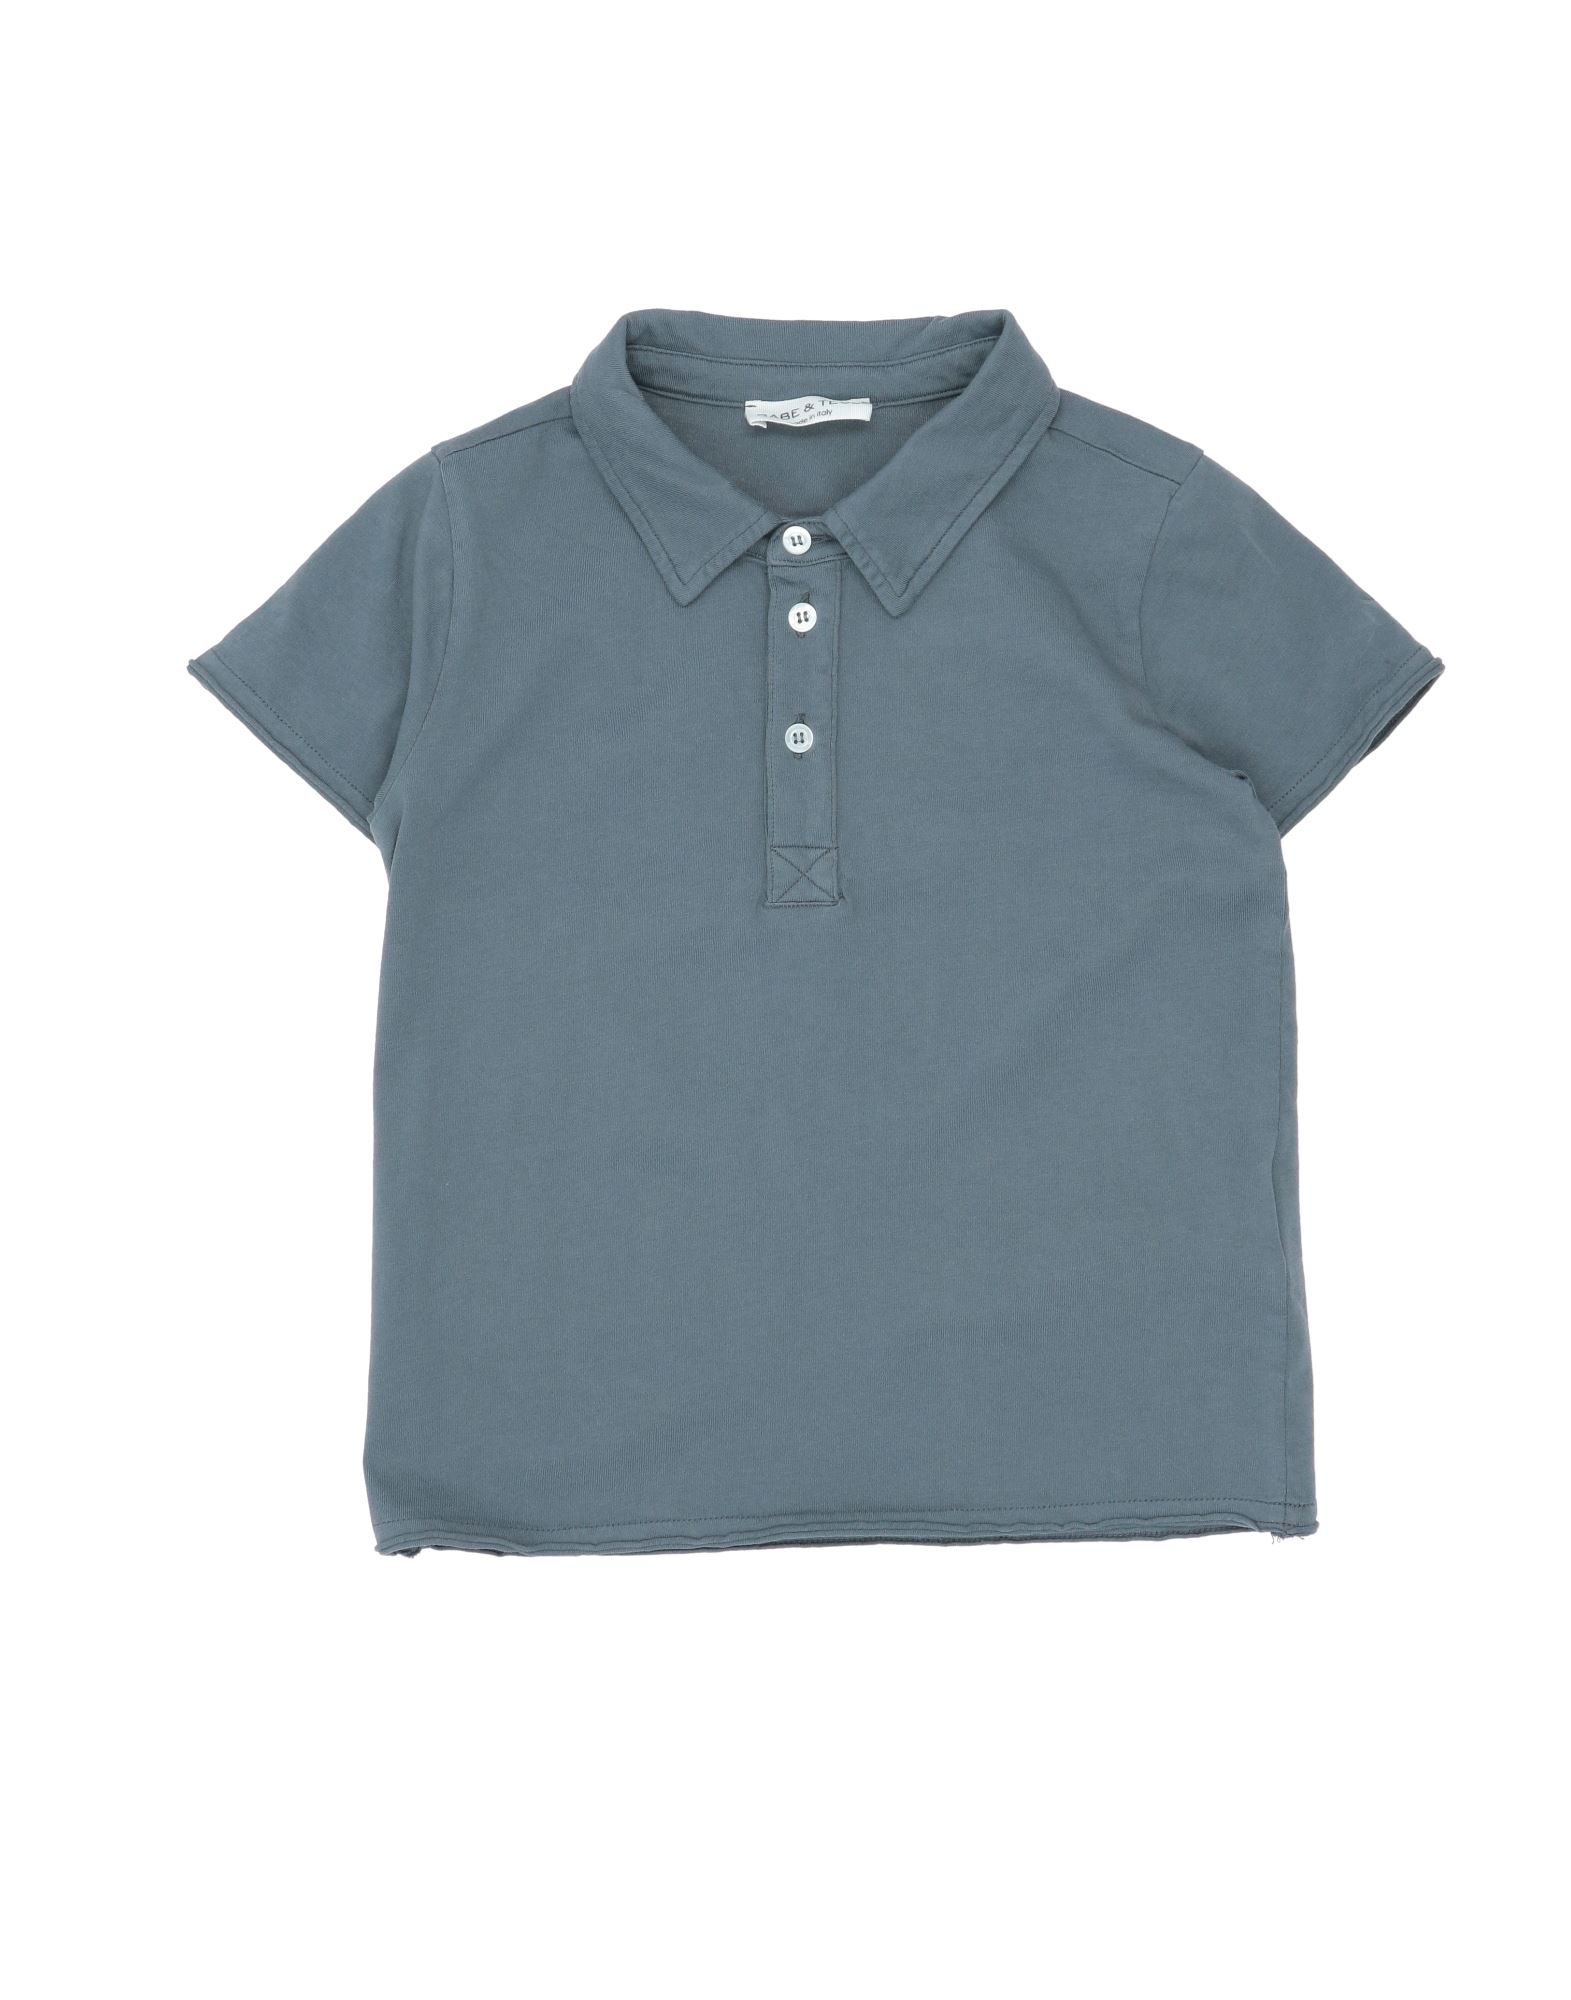 Babe And Tess Kids' Babe & Tess Toddler Boy Polo Shirt Lead Size 5 Cotton In Grey